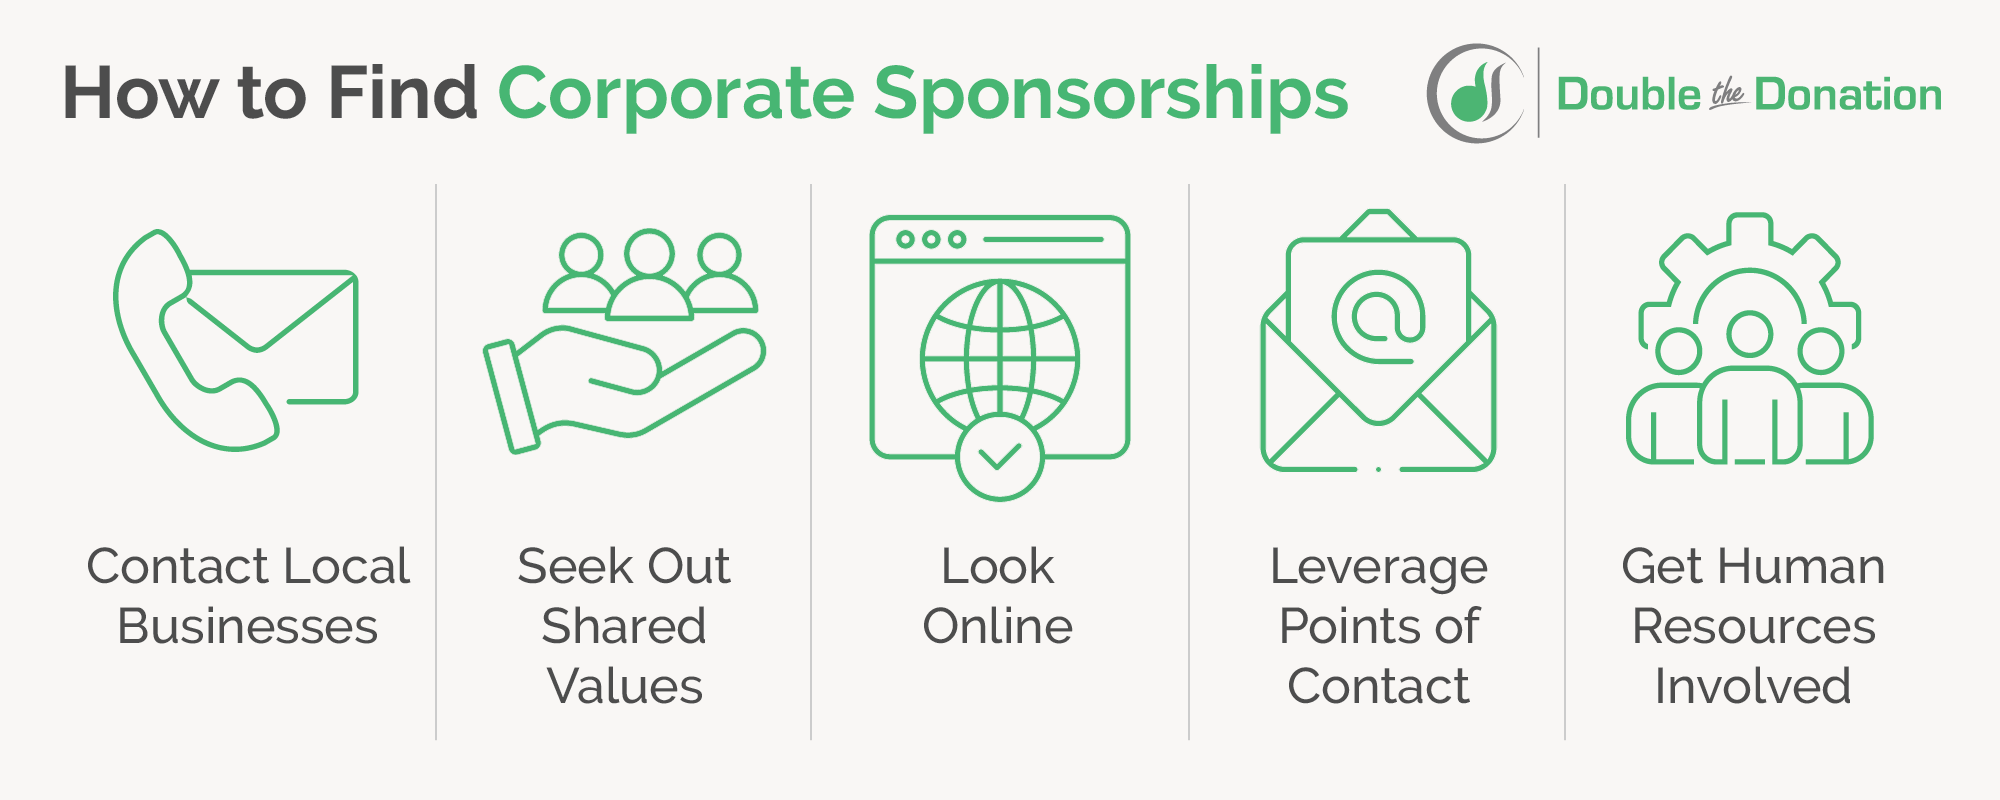 This image and the following text reveal strategies for finding corporate sponsorships.